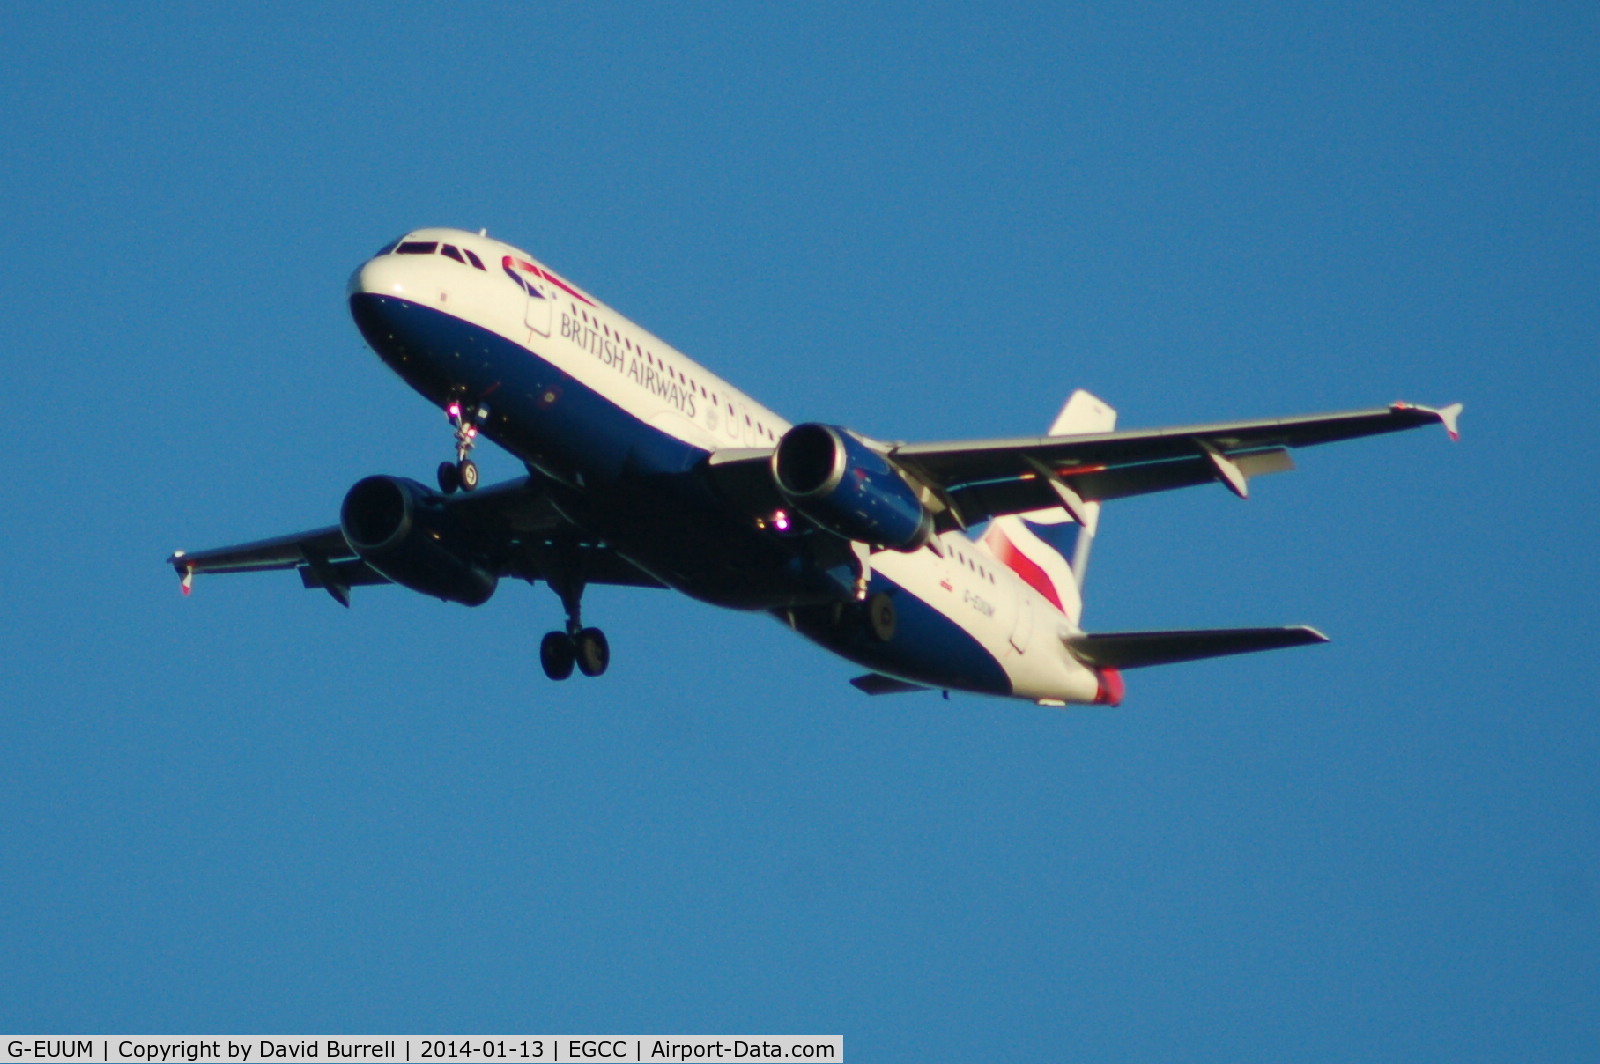 G-EUUM, 2002 Airbus A320-232 C/N 1907, British Airways Airbus A320-232 on approach to Manchester Airport.